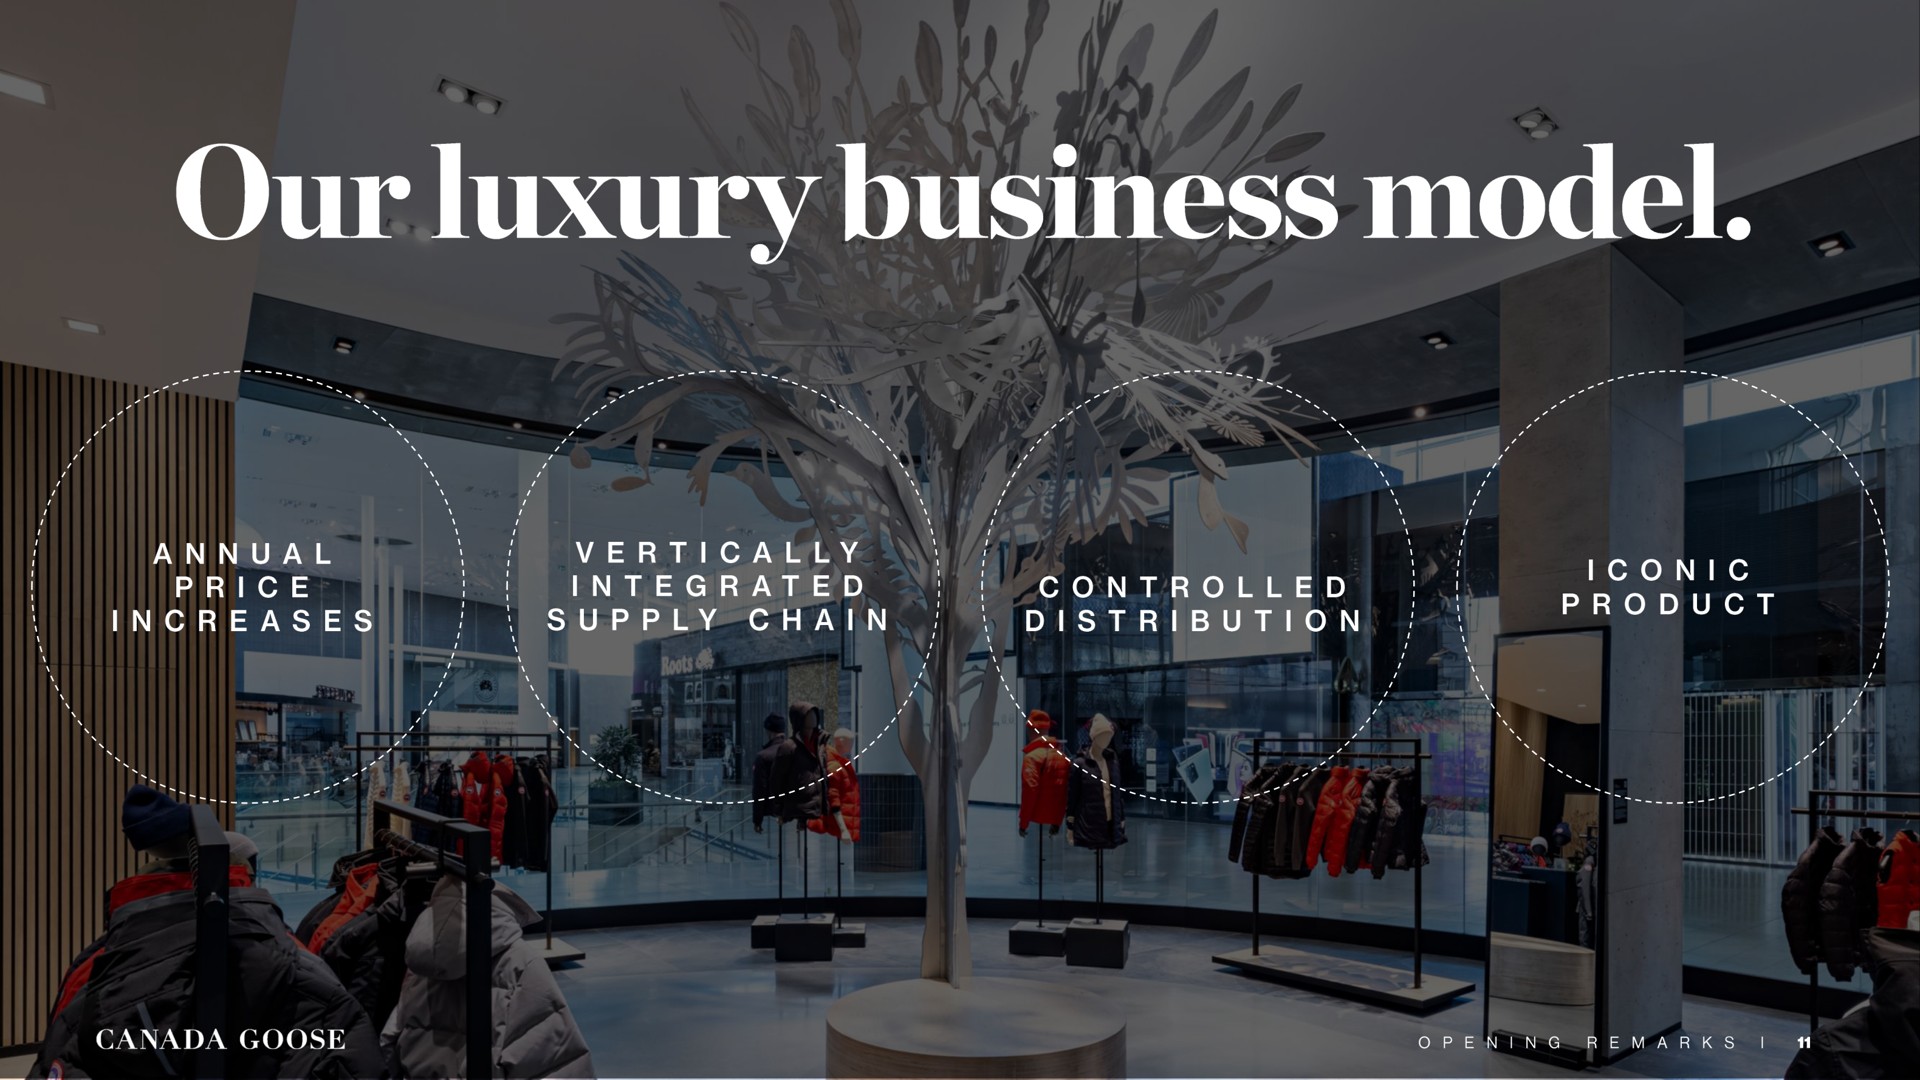 our luxury business model iconic product canada goose | Canada Goose